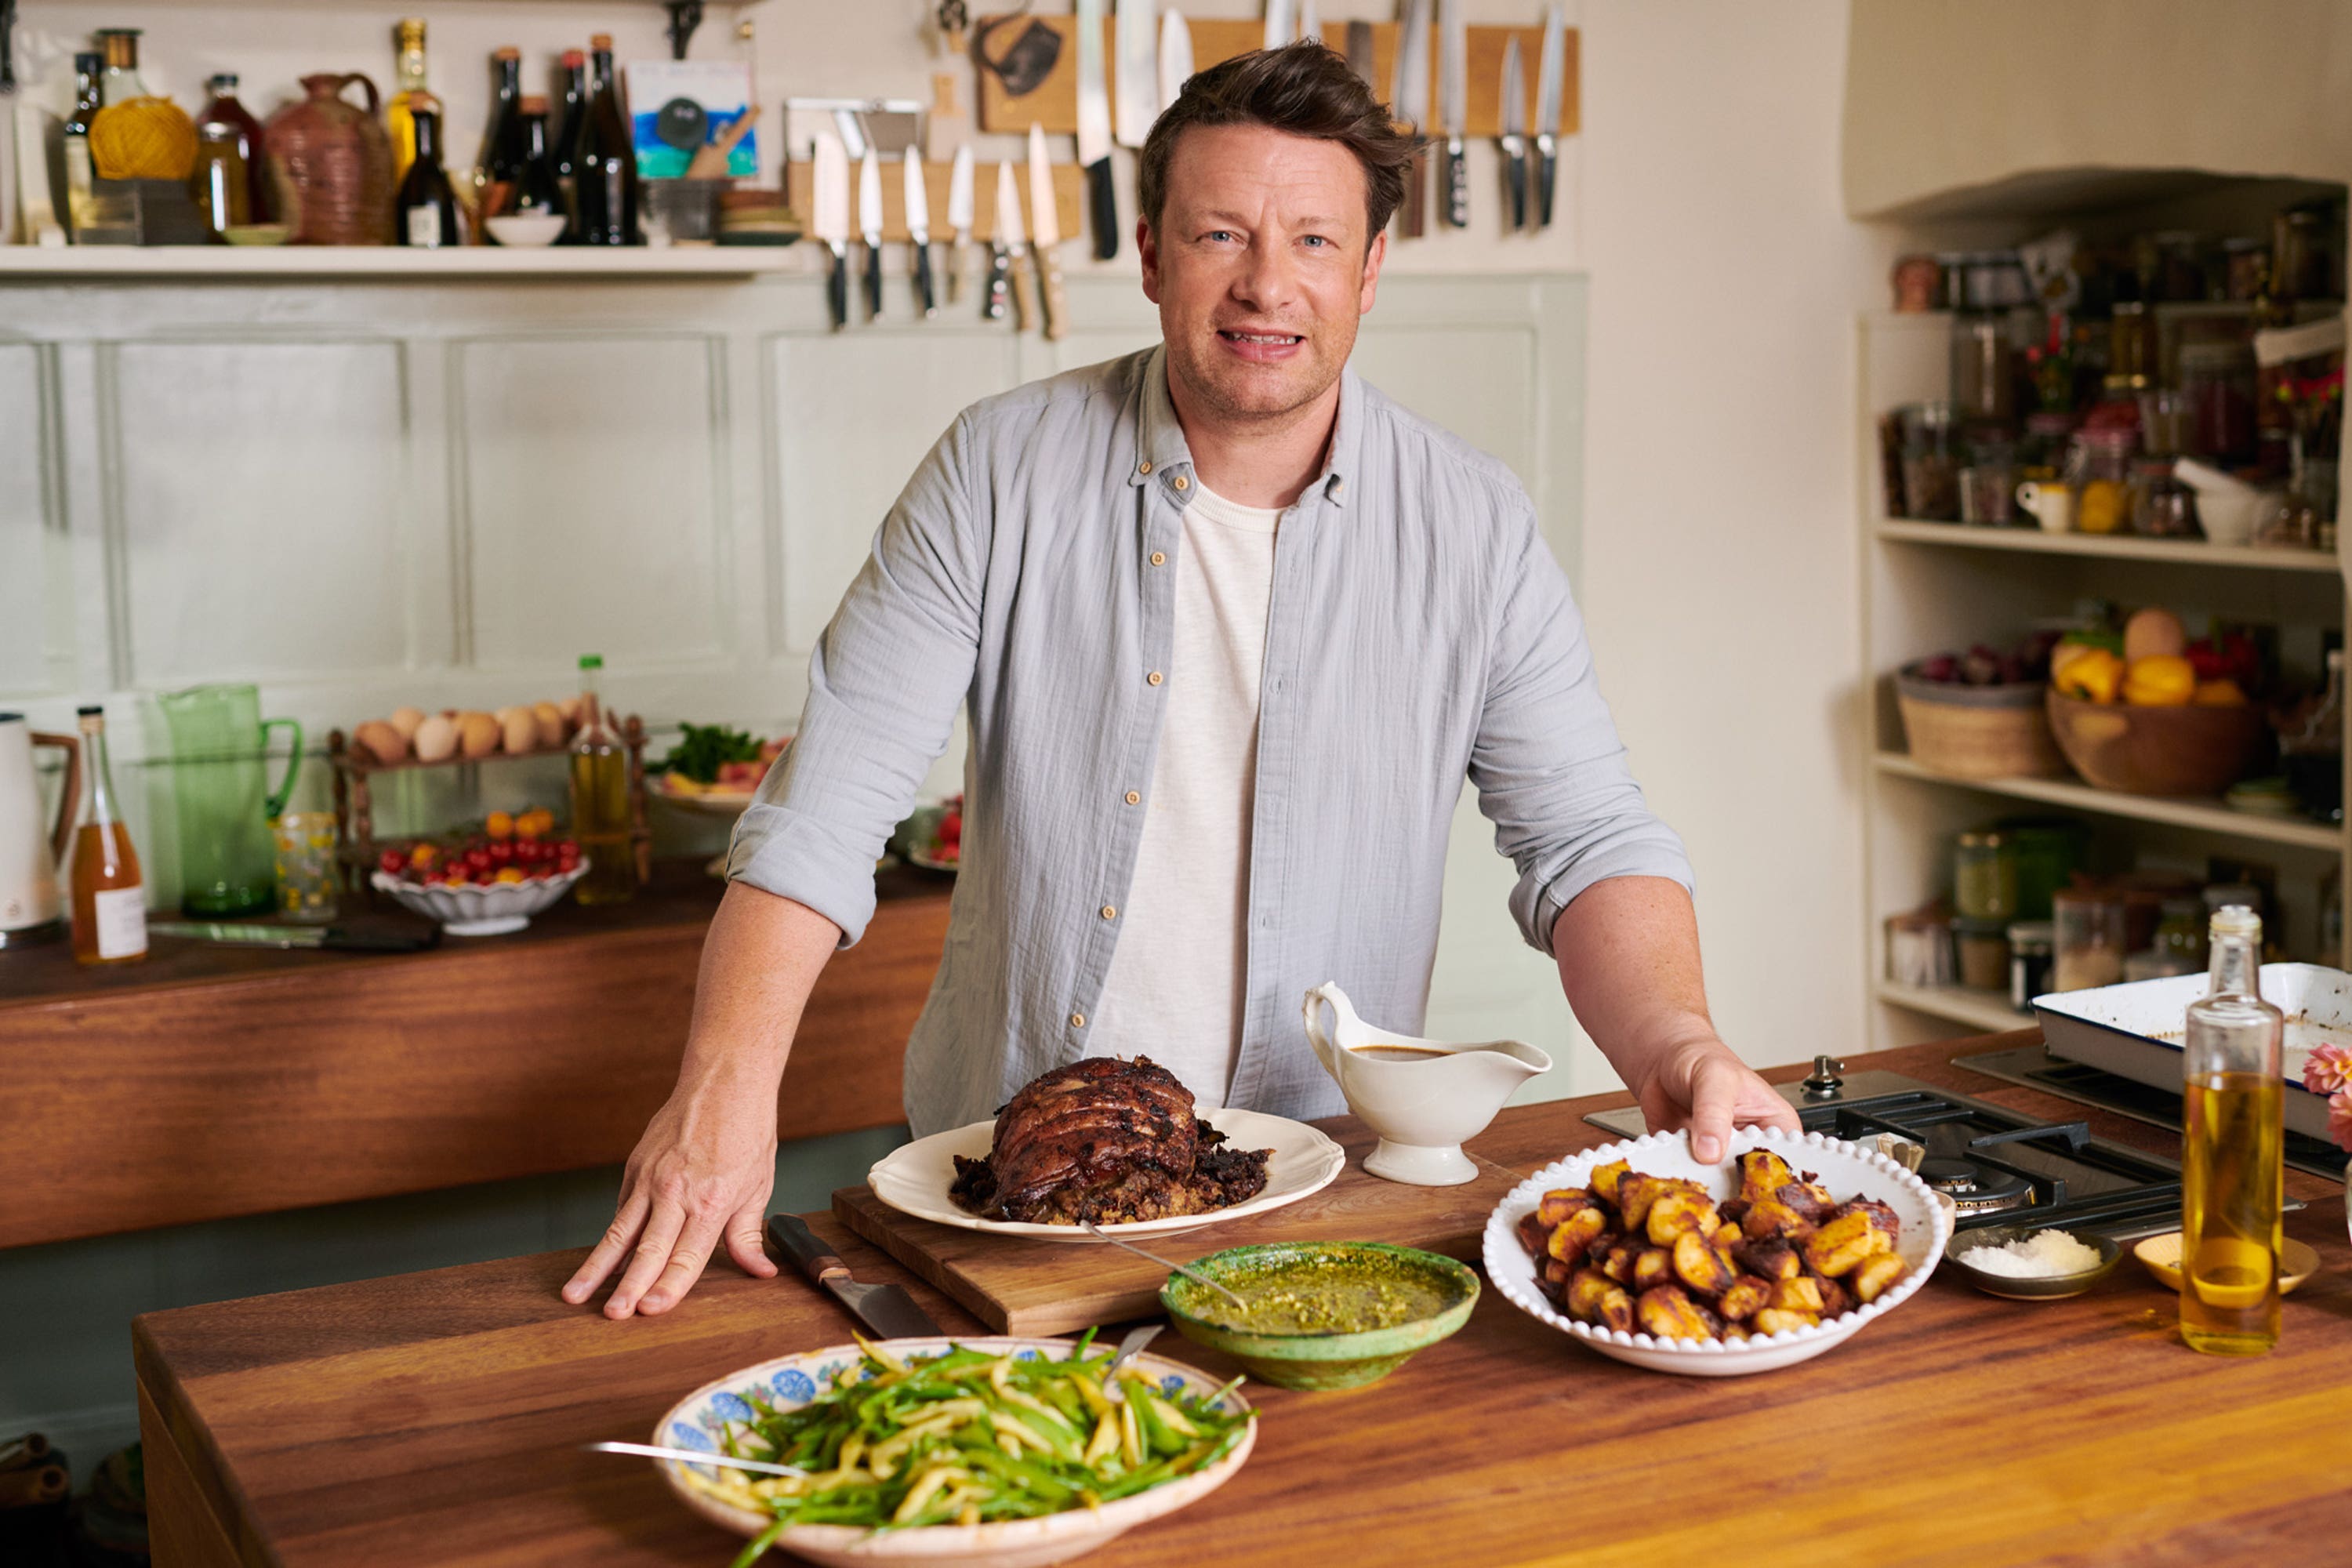 Celebrity chef and local Jamie Oliver is an advocate for healthy school meals